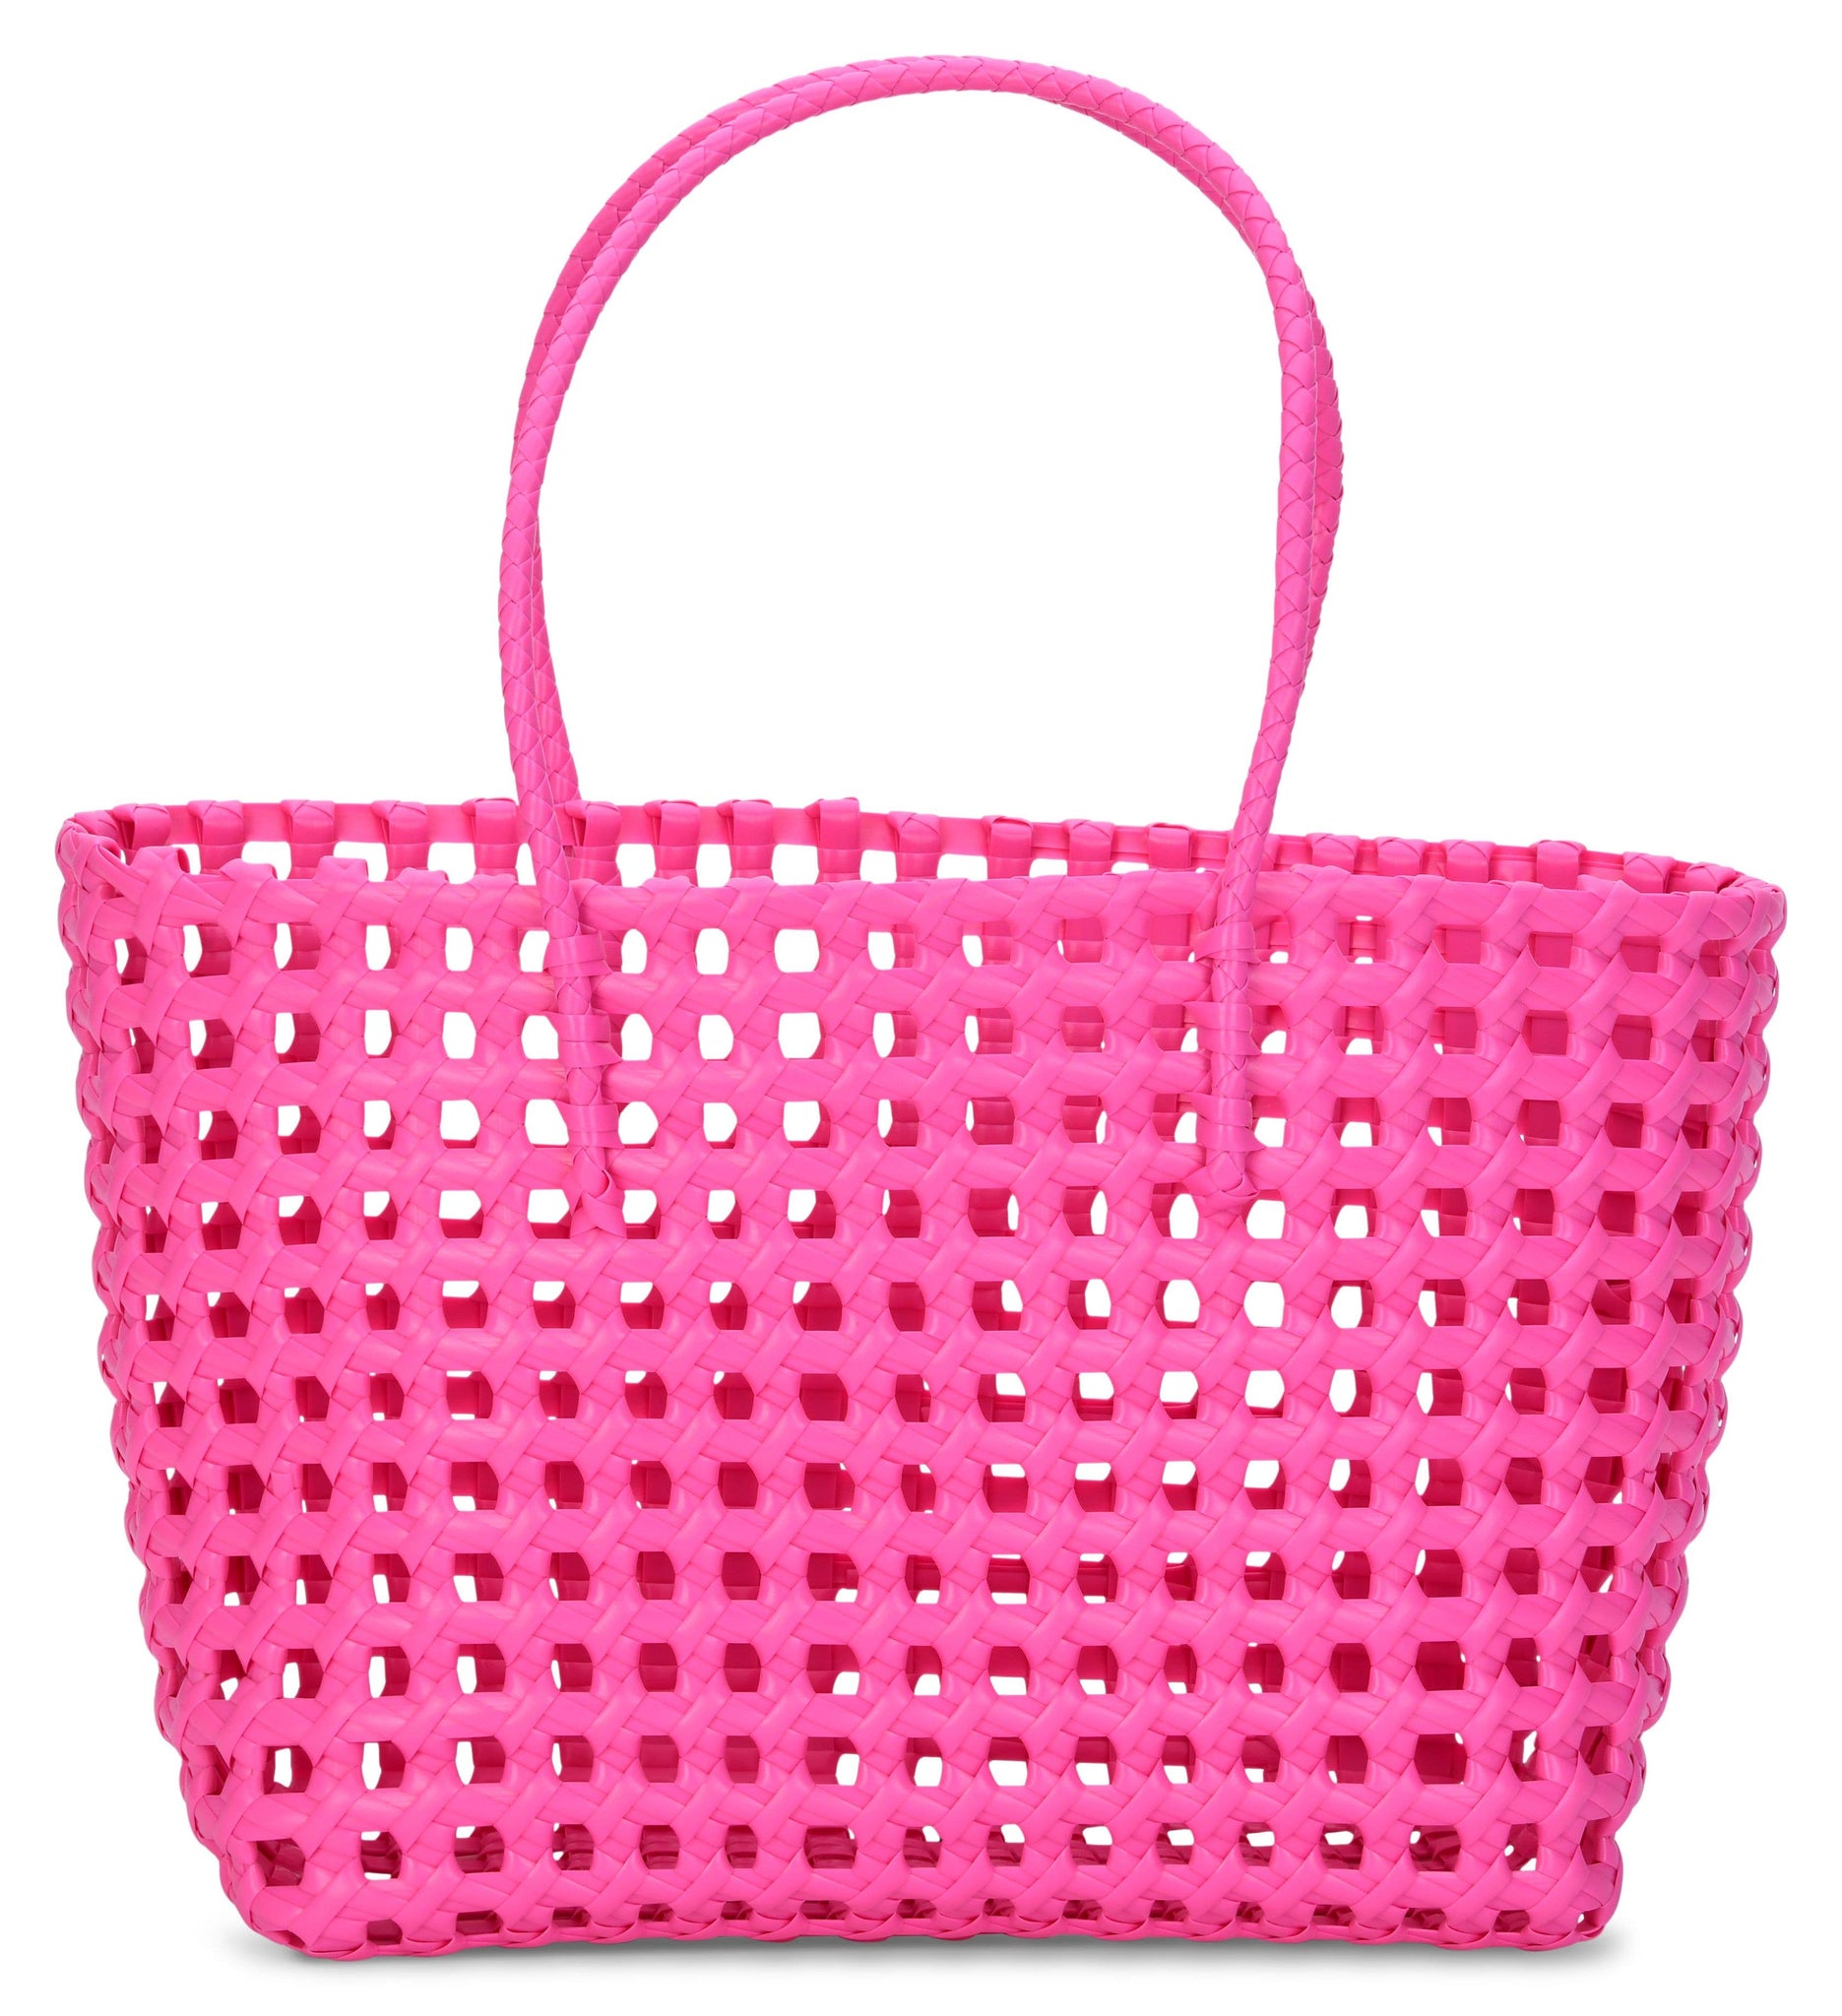 LARGE PINK WOVEN TOTE BAG